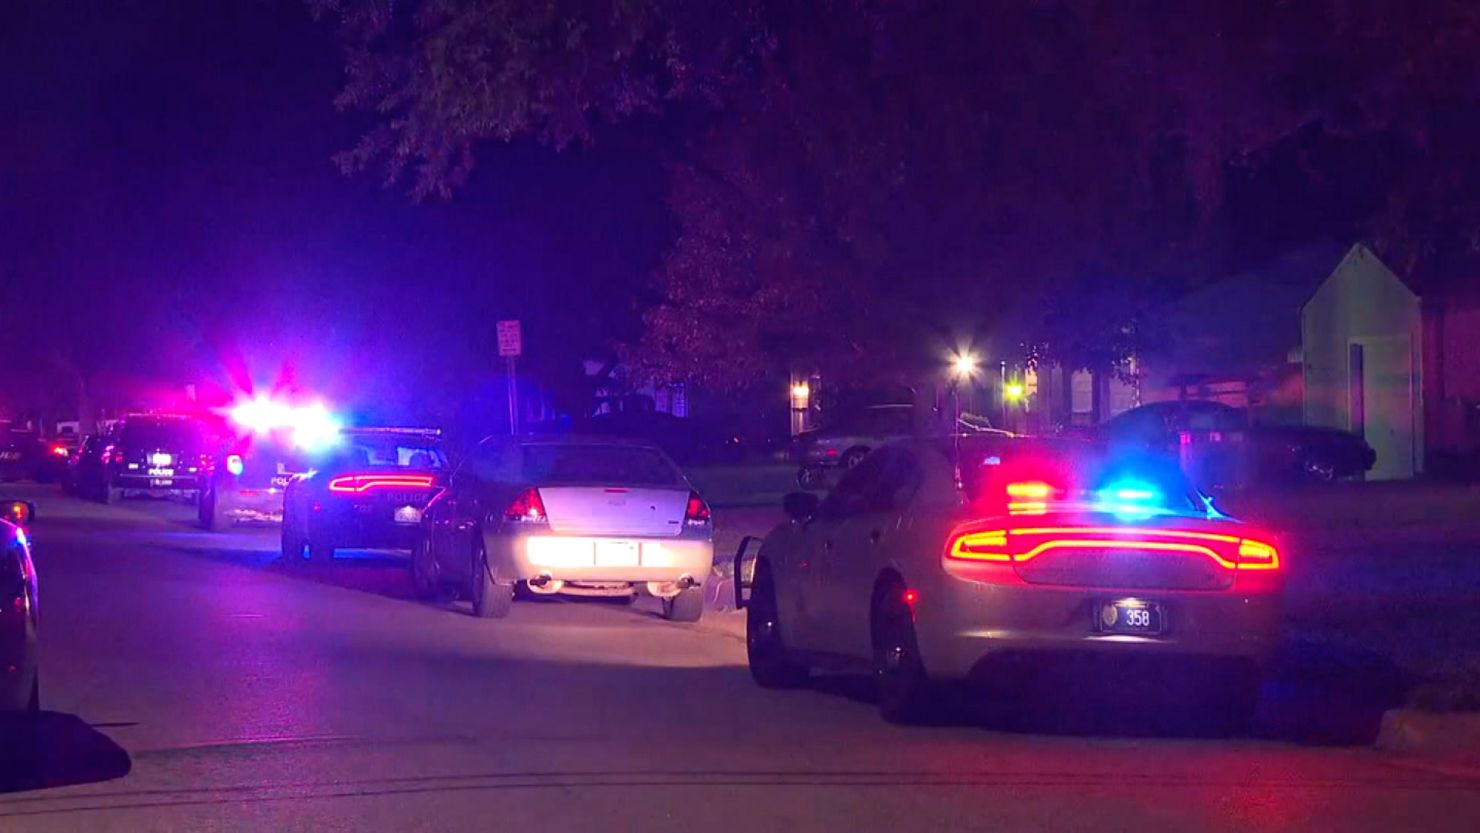 A Wichita Police officer was shot multiple times Saturday night, authorities said.